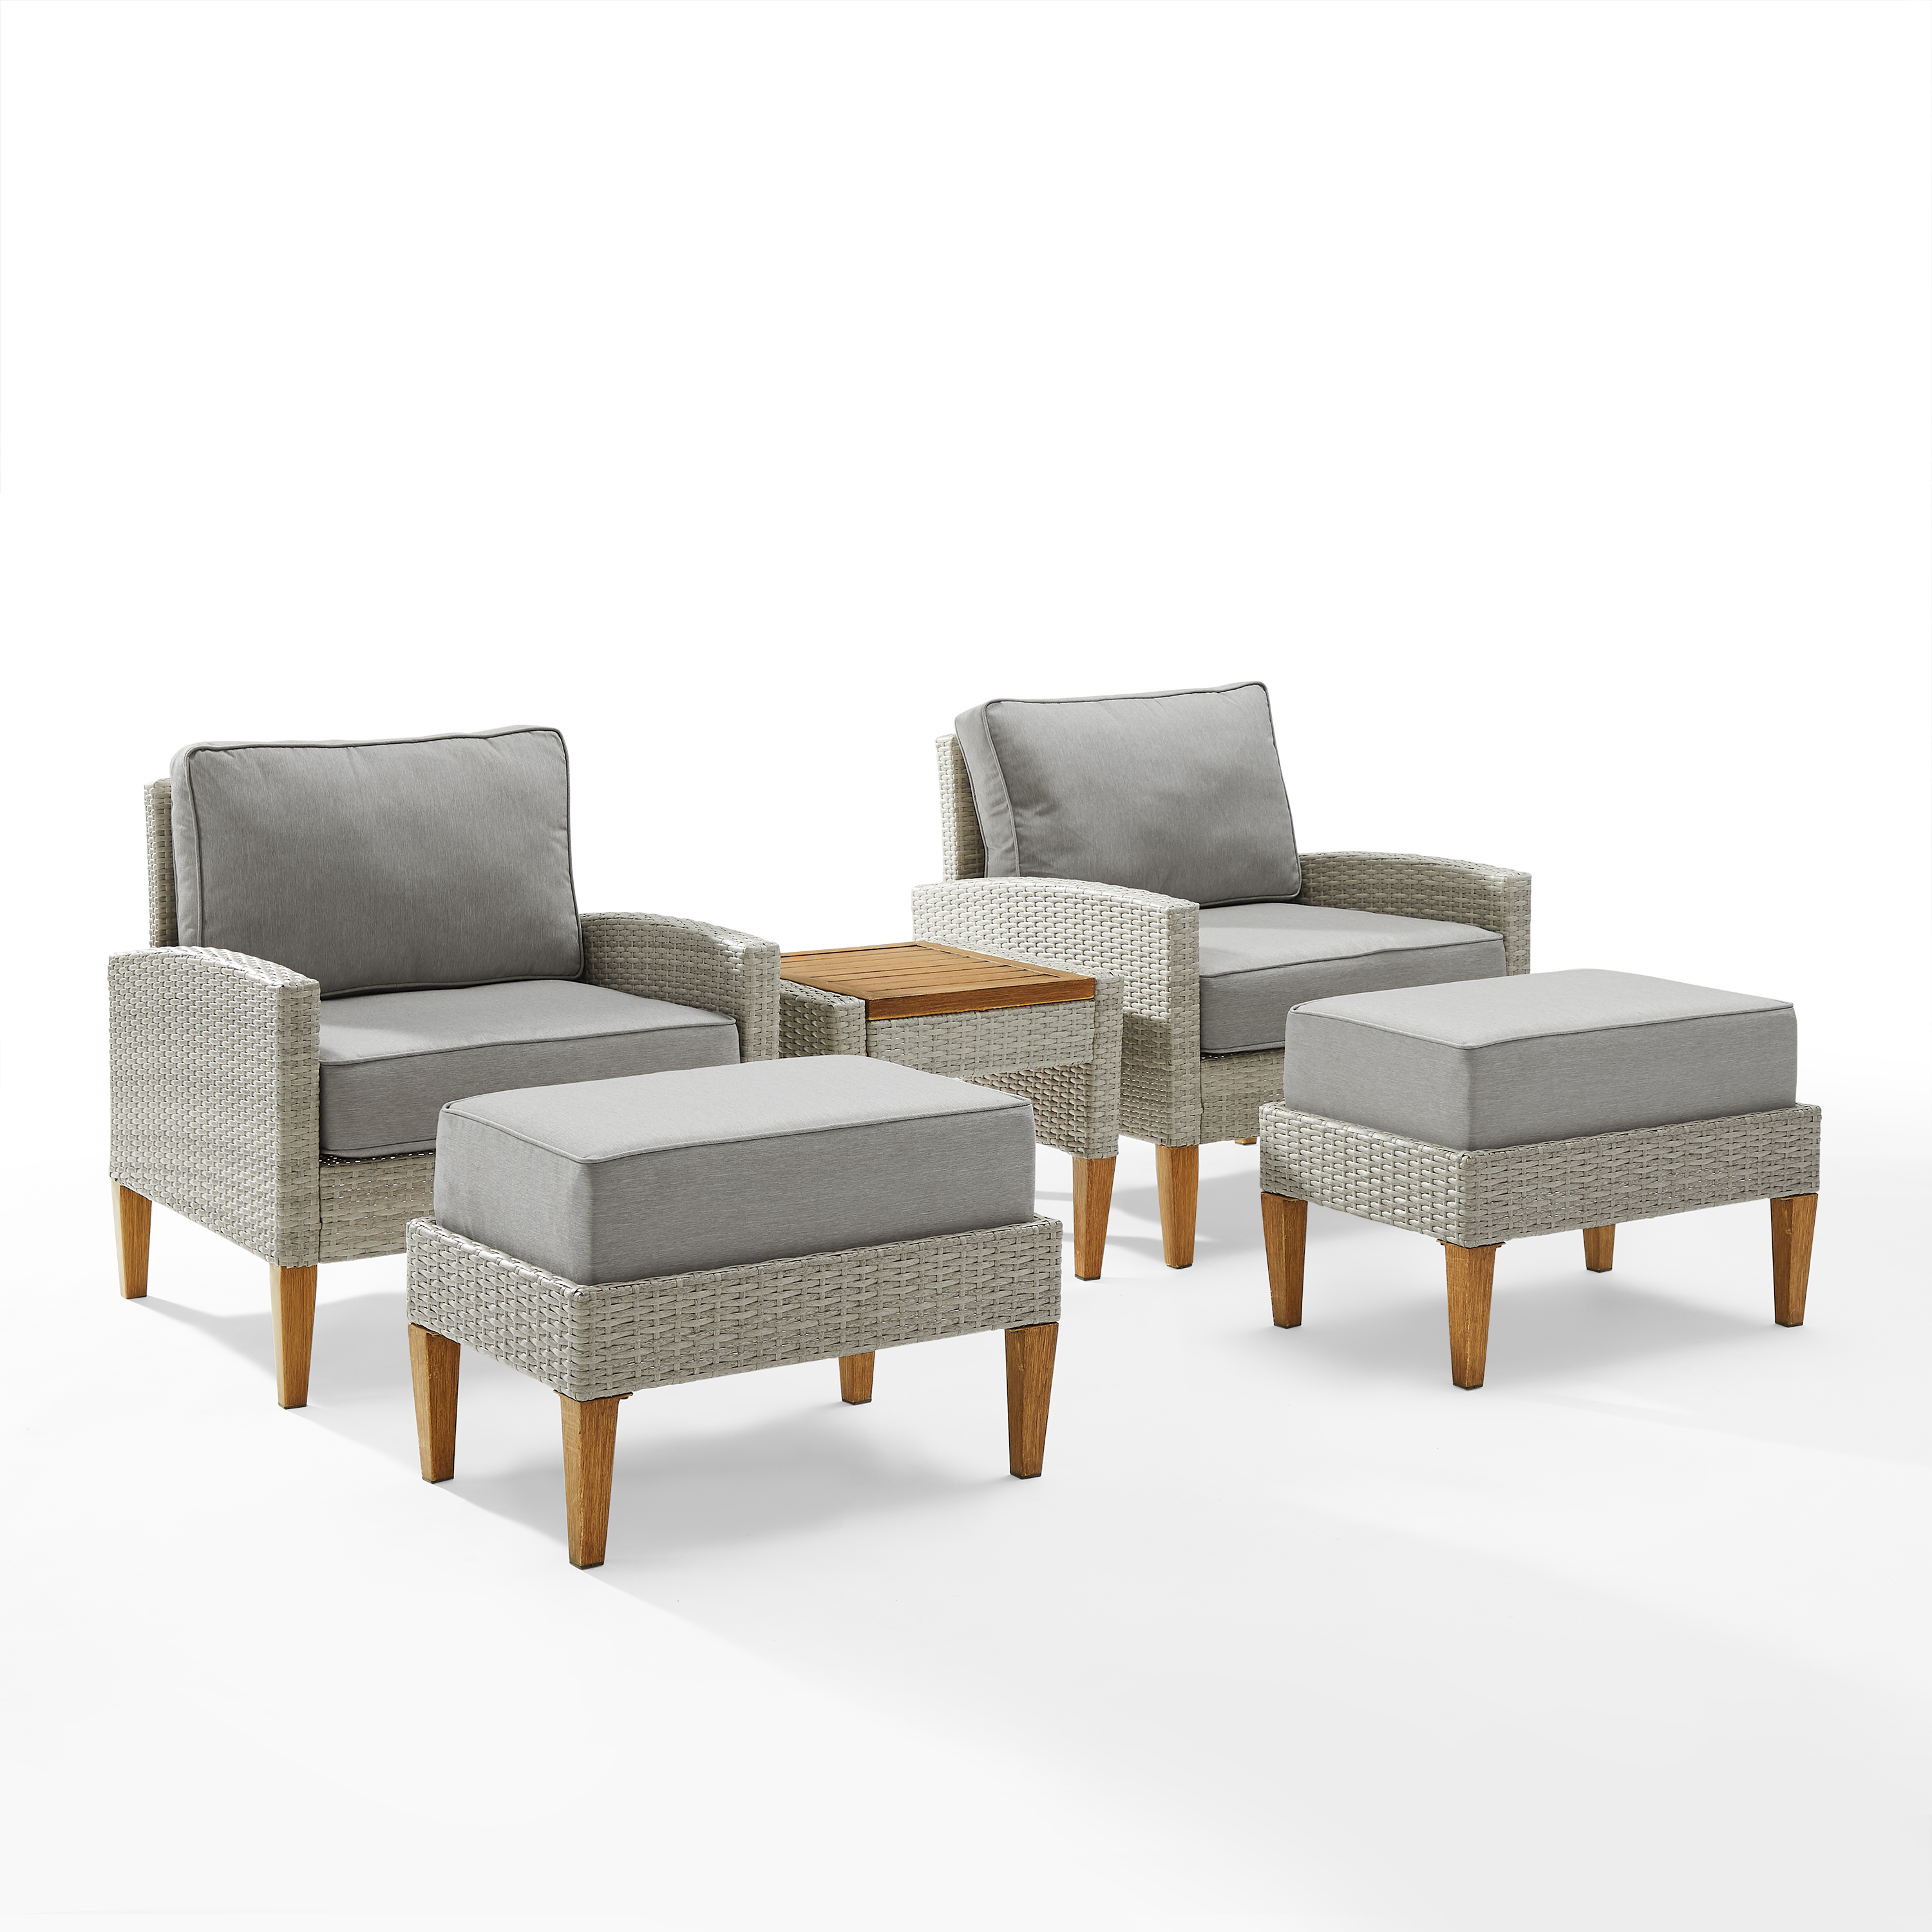 Crosley Fruniture Capella 5Pc Outdoor Wicker Chair Set Gray/Acorn - Side Table, 2 Armchairs, & 2 Ottomans - image 1 of 16